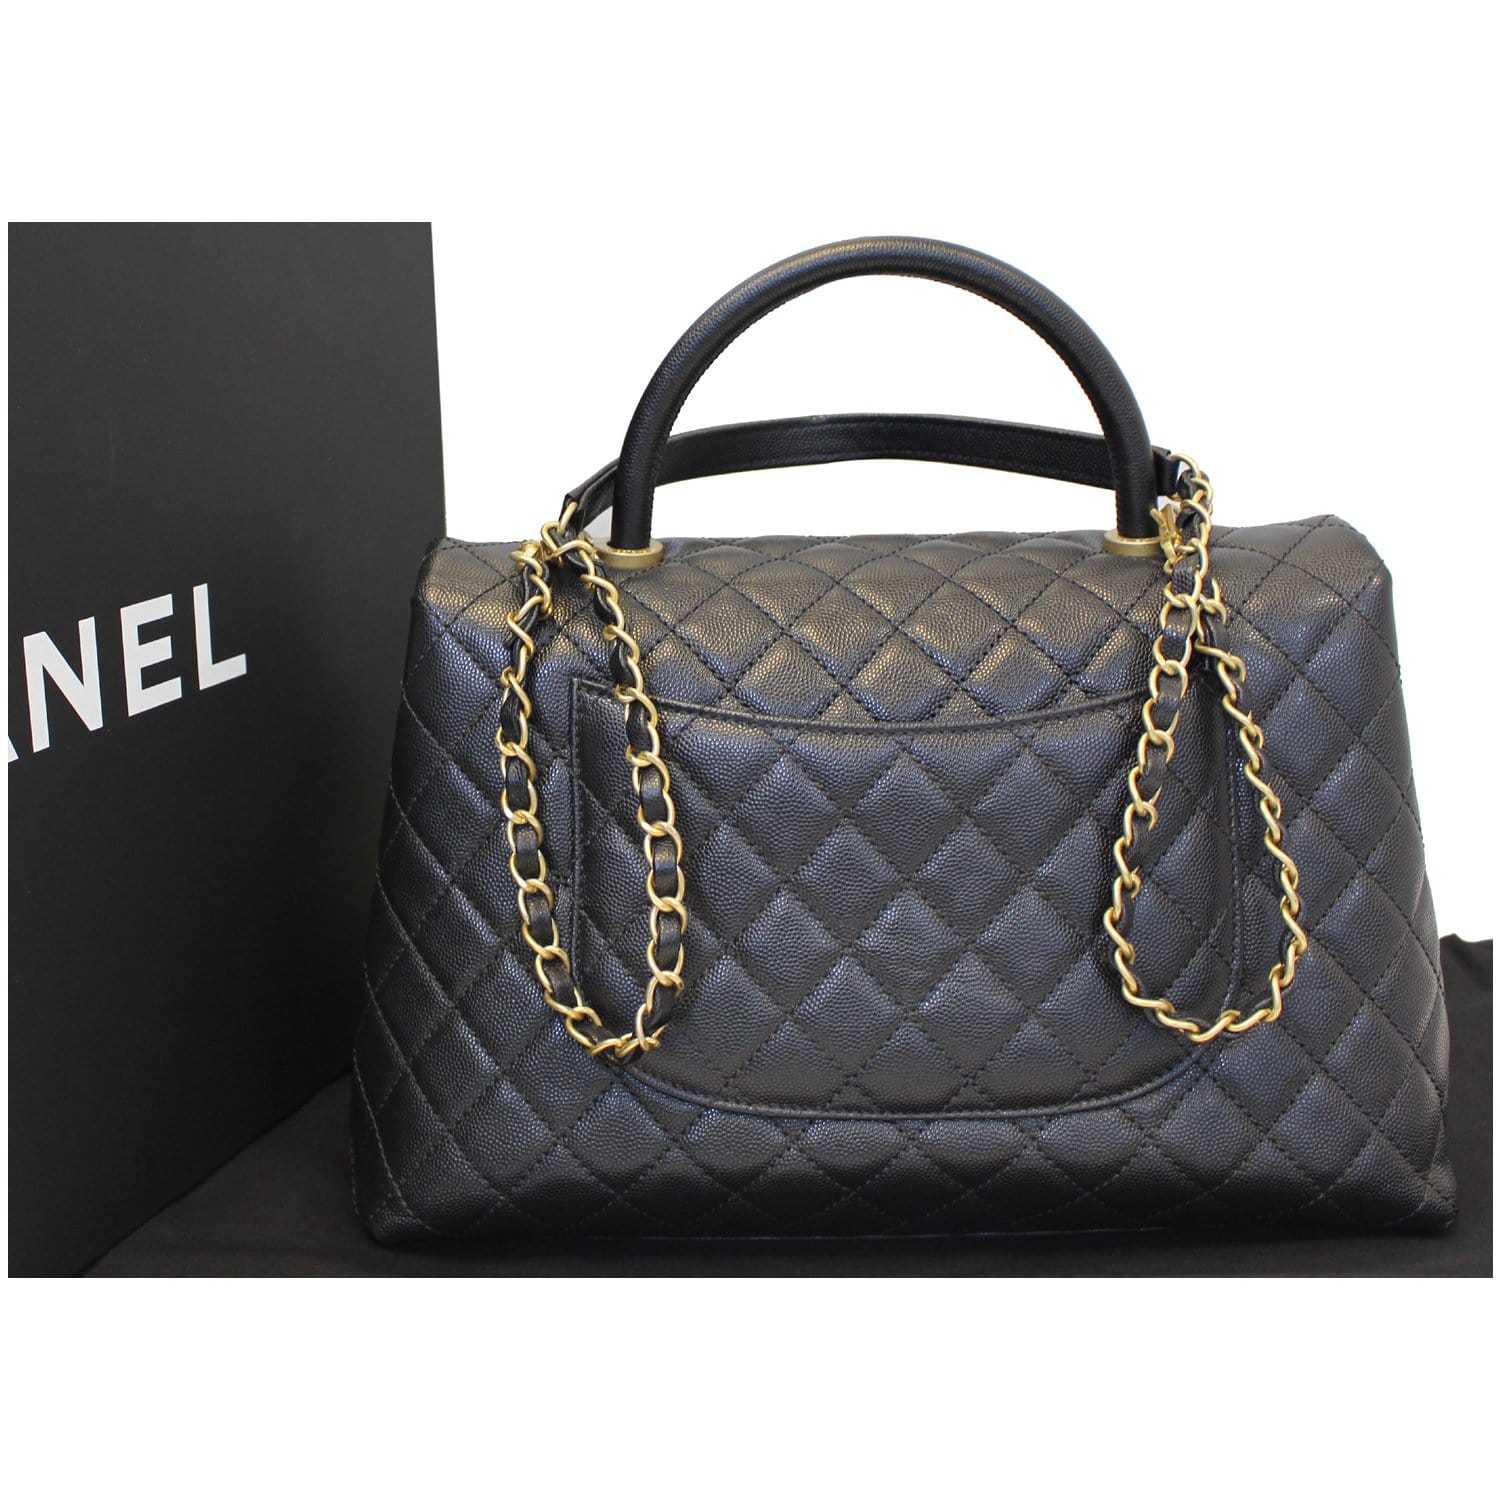 Chanel Black Quilted Caviar Large Coco Top Handle Pale Gold Hardware (Very Good), Womens Handbag